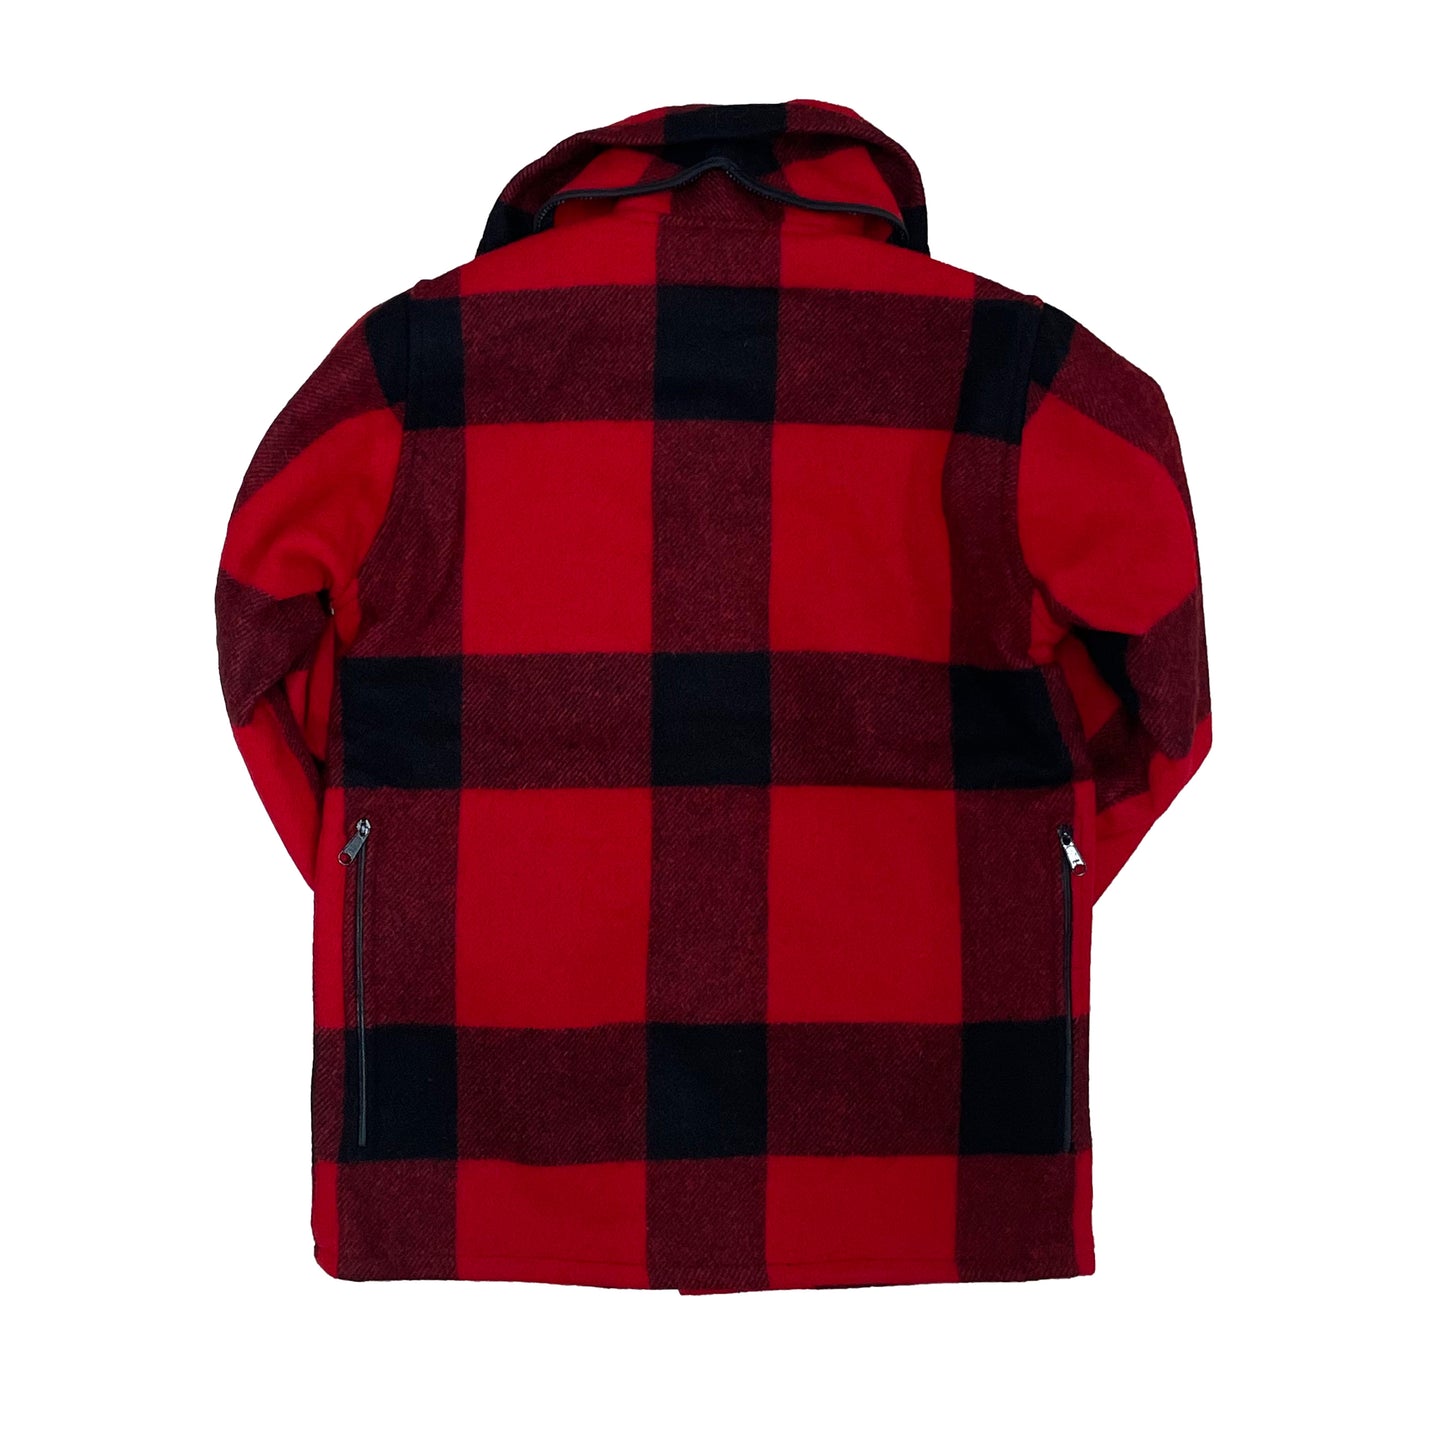 Johnson Woolen Mills Red and black buffalo check outdoor wool coat back view